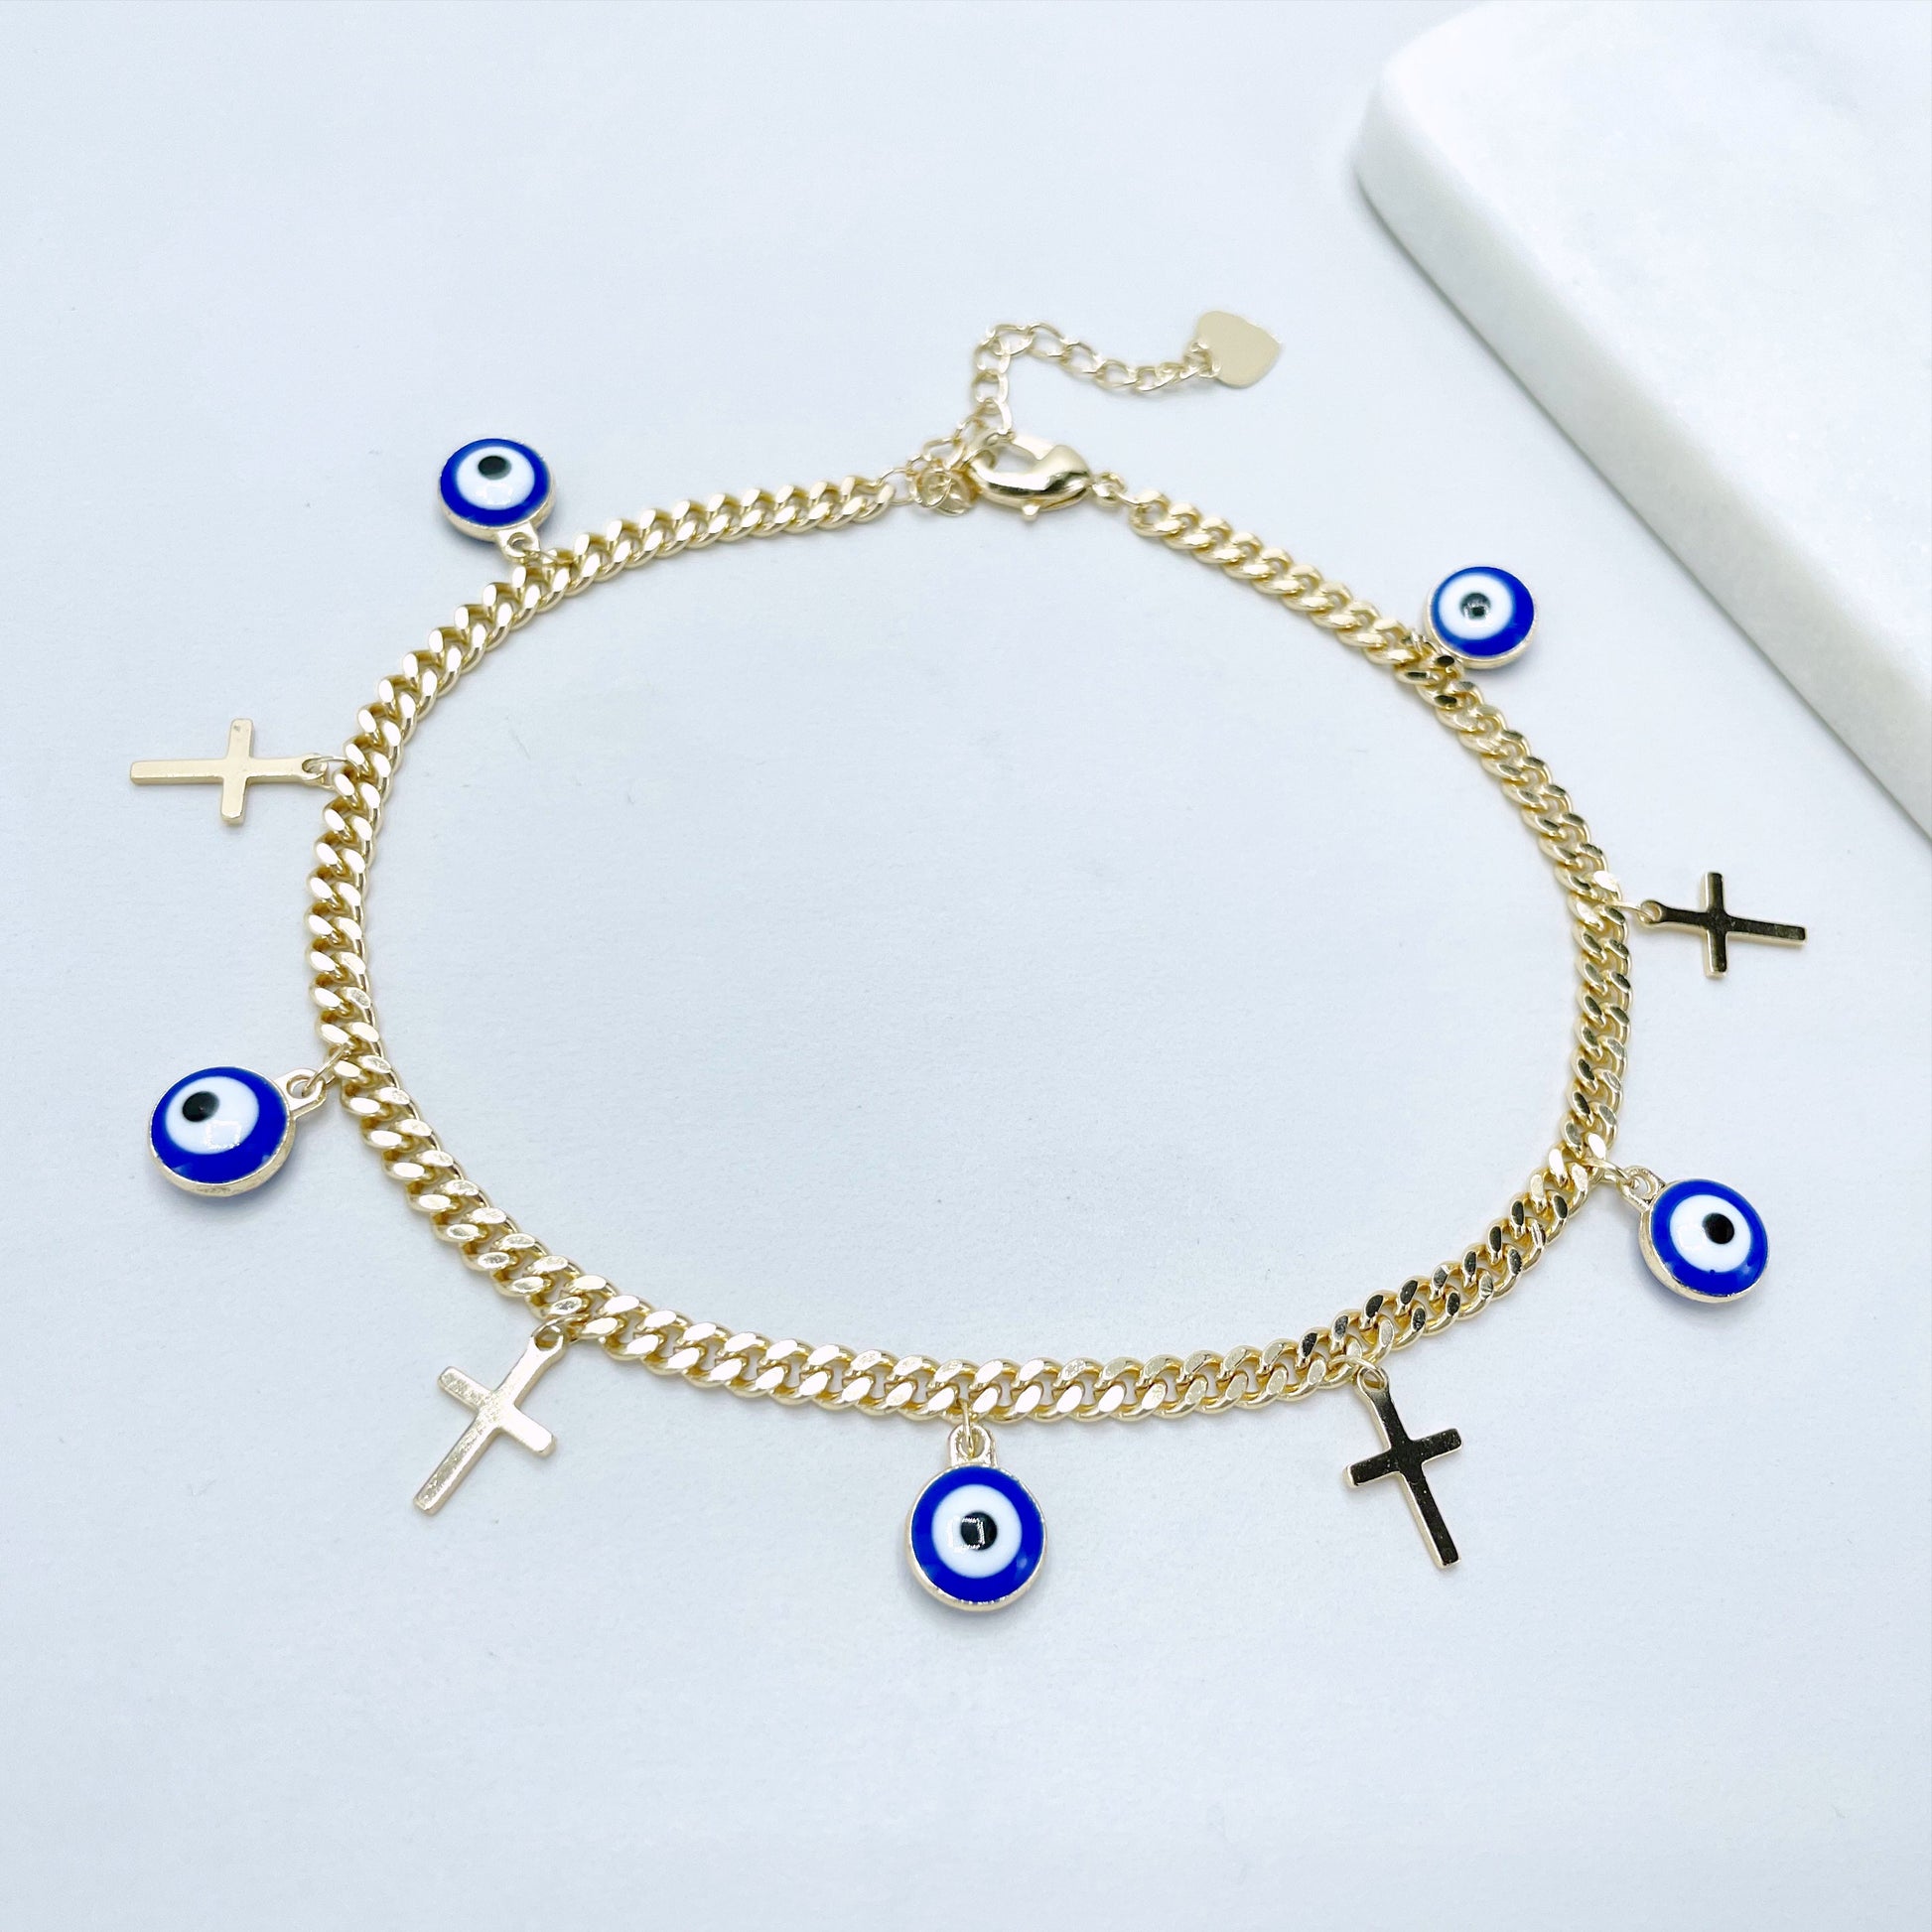 18k Gold Filled 4mm Curb Link Chain with Blue Evil Eyes & Cross Charms Necklace or Anklet Set, Wholesale Jewelry Making Supplies